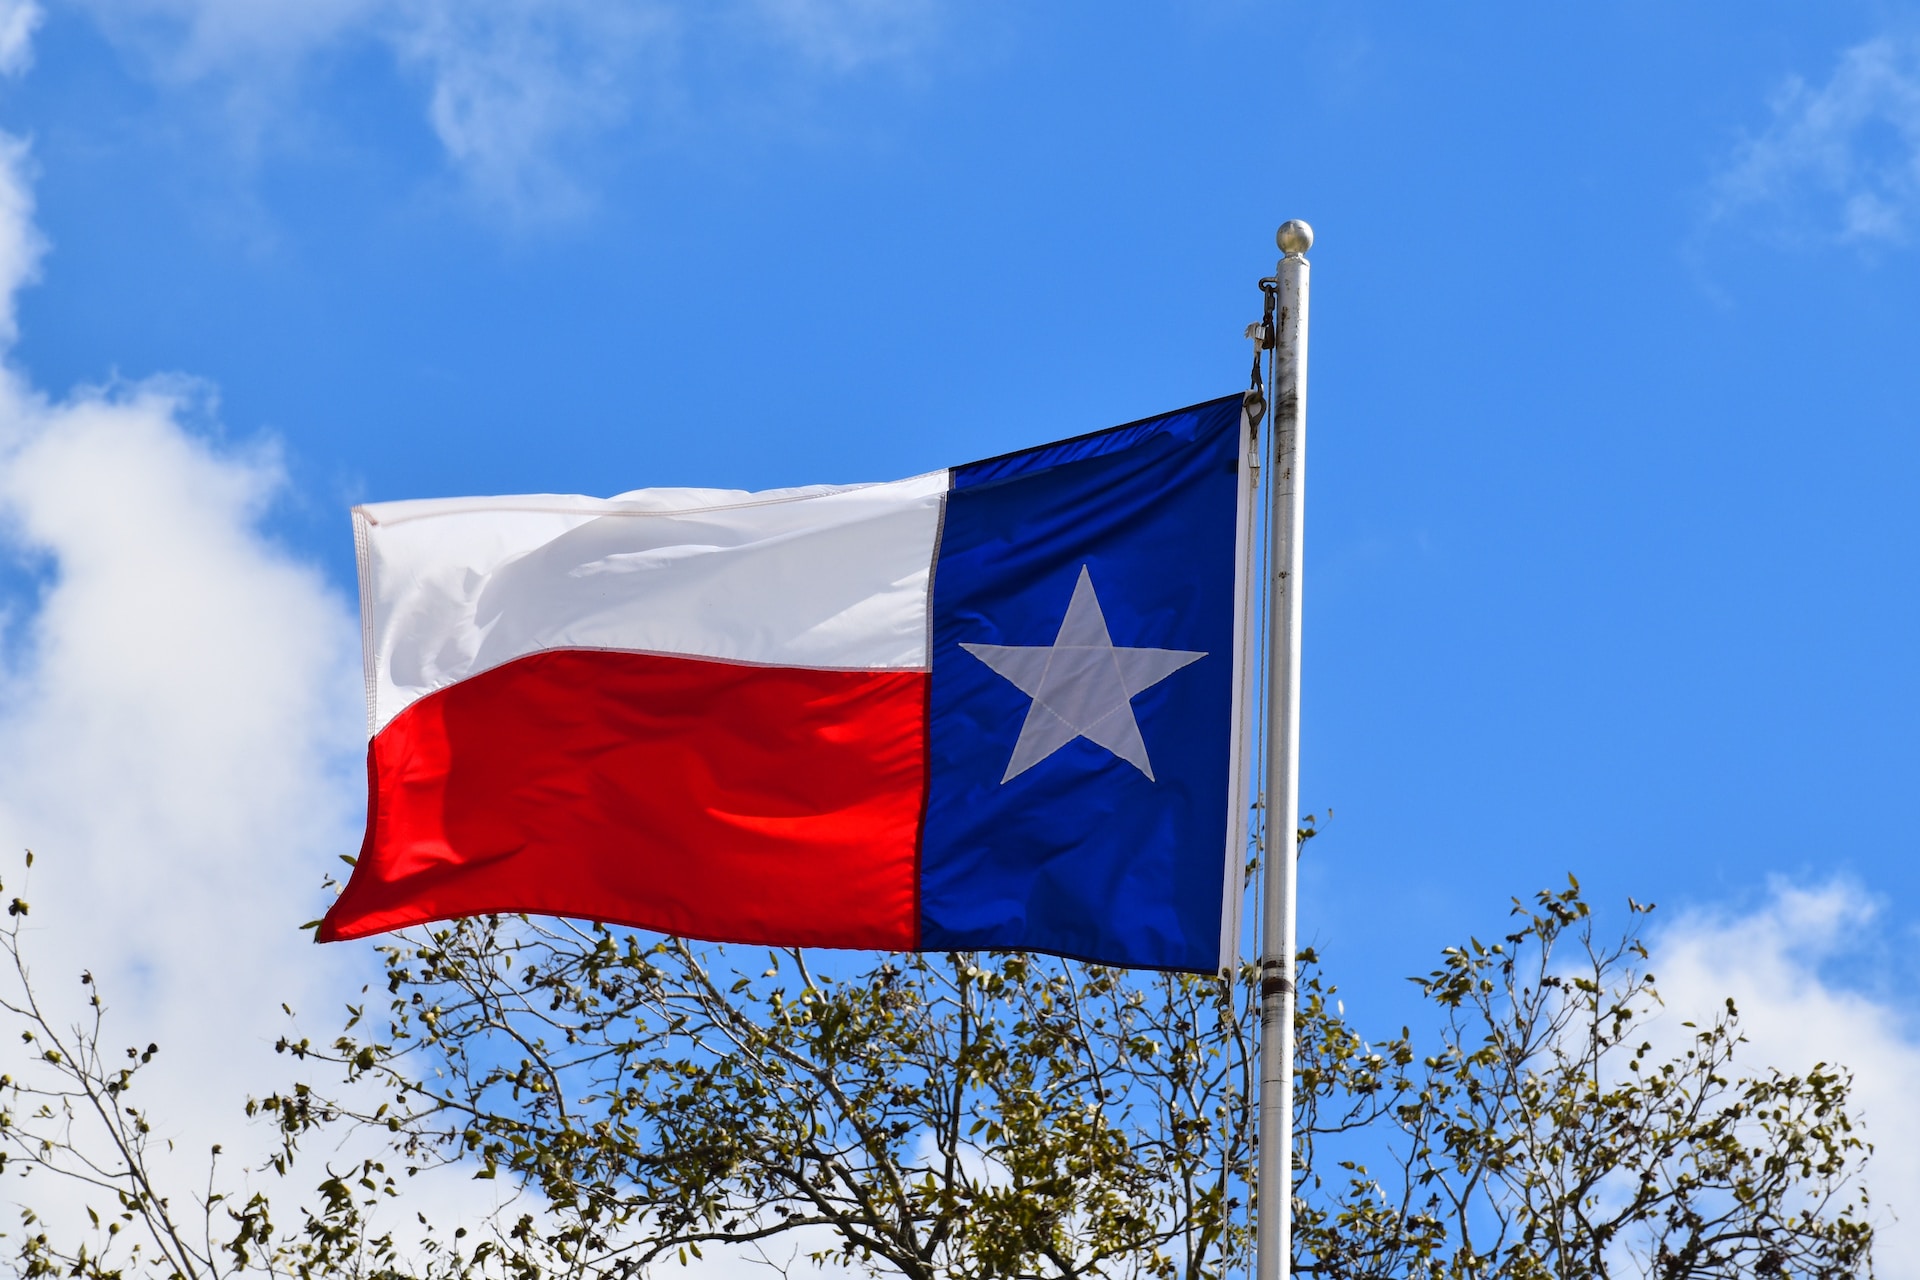 Texas State flag under the clear blue sky